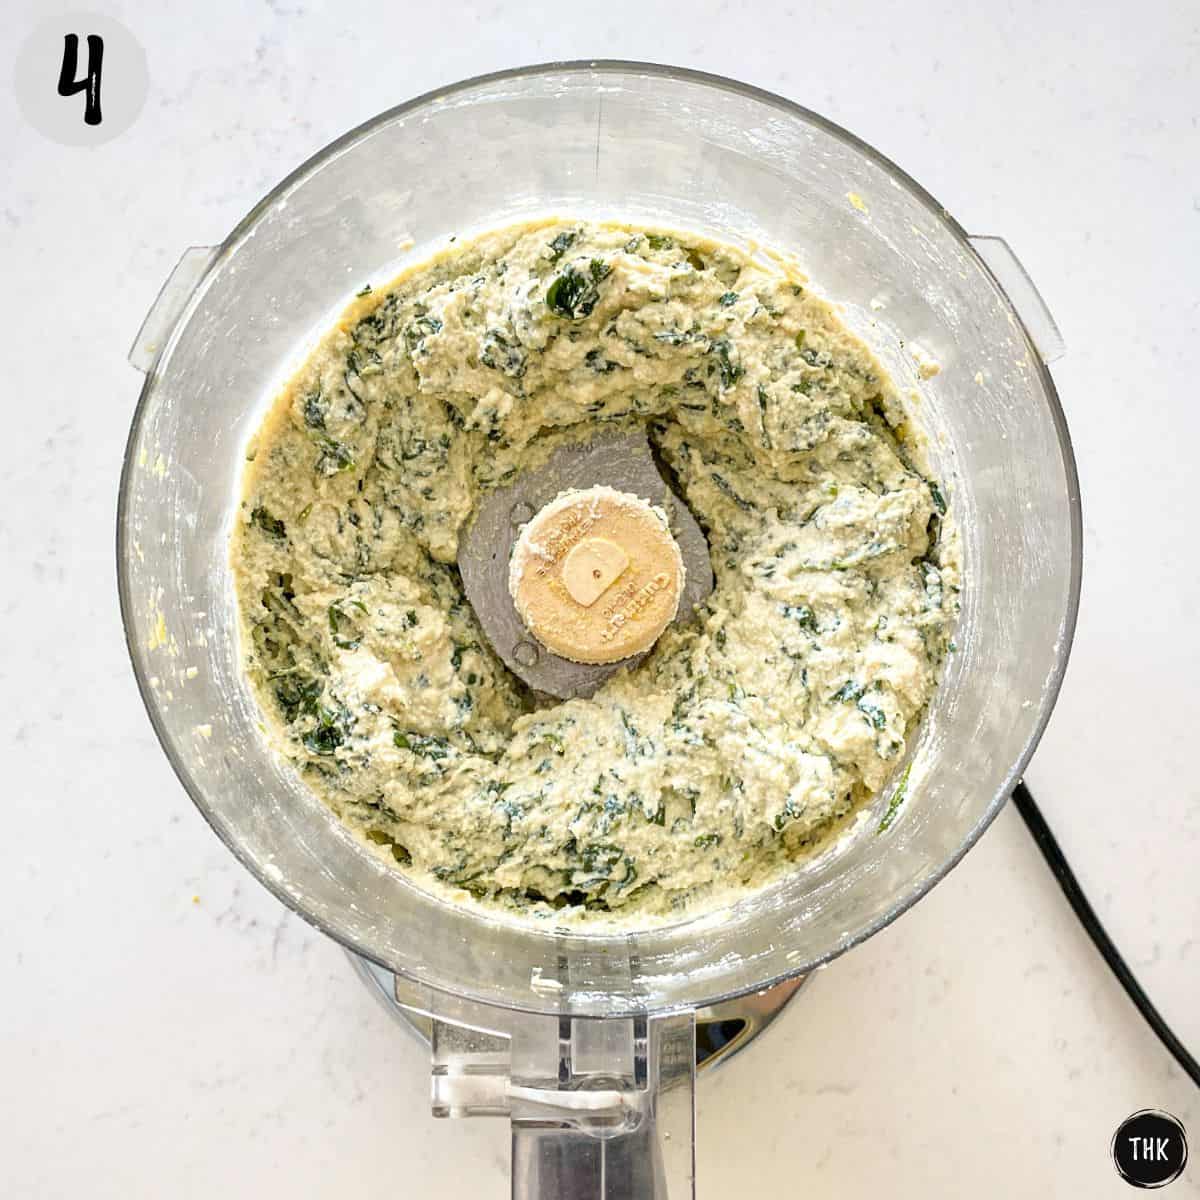 Food processor with vegan ricotta cheese and spinach inside.